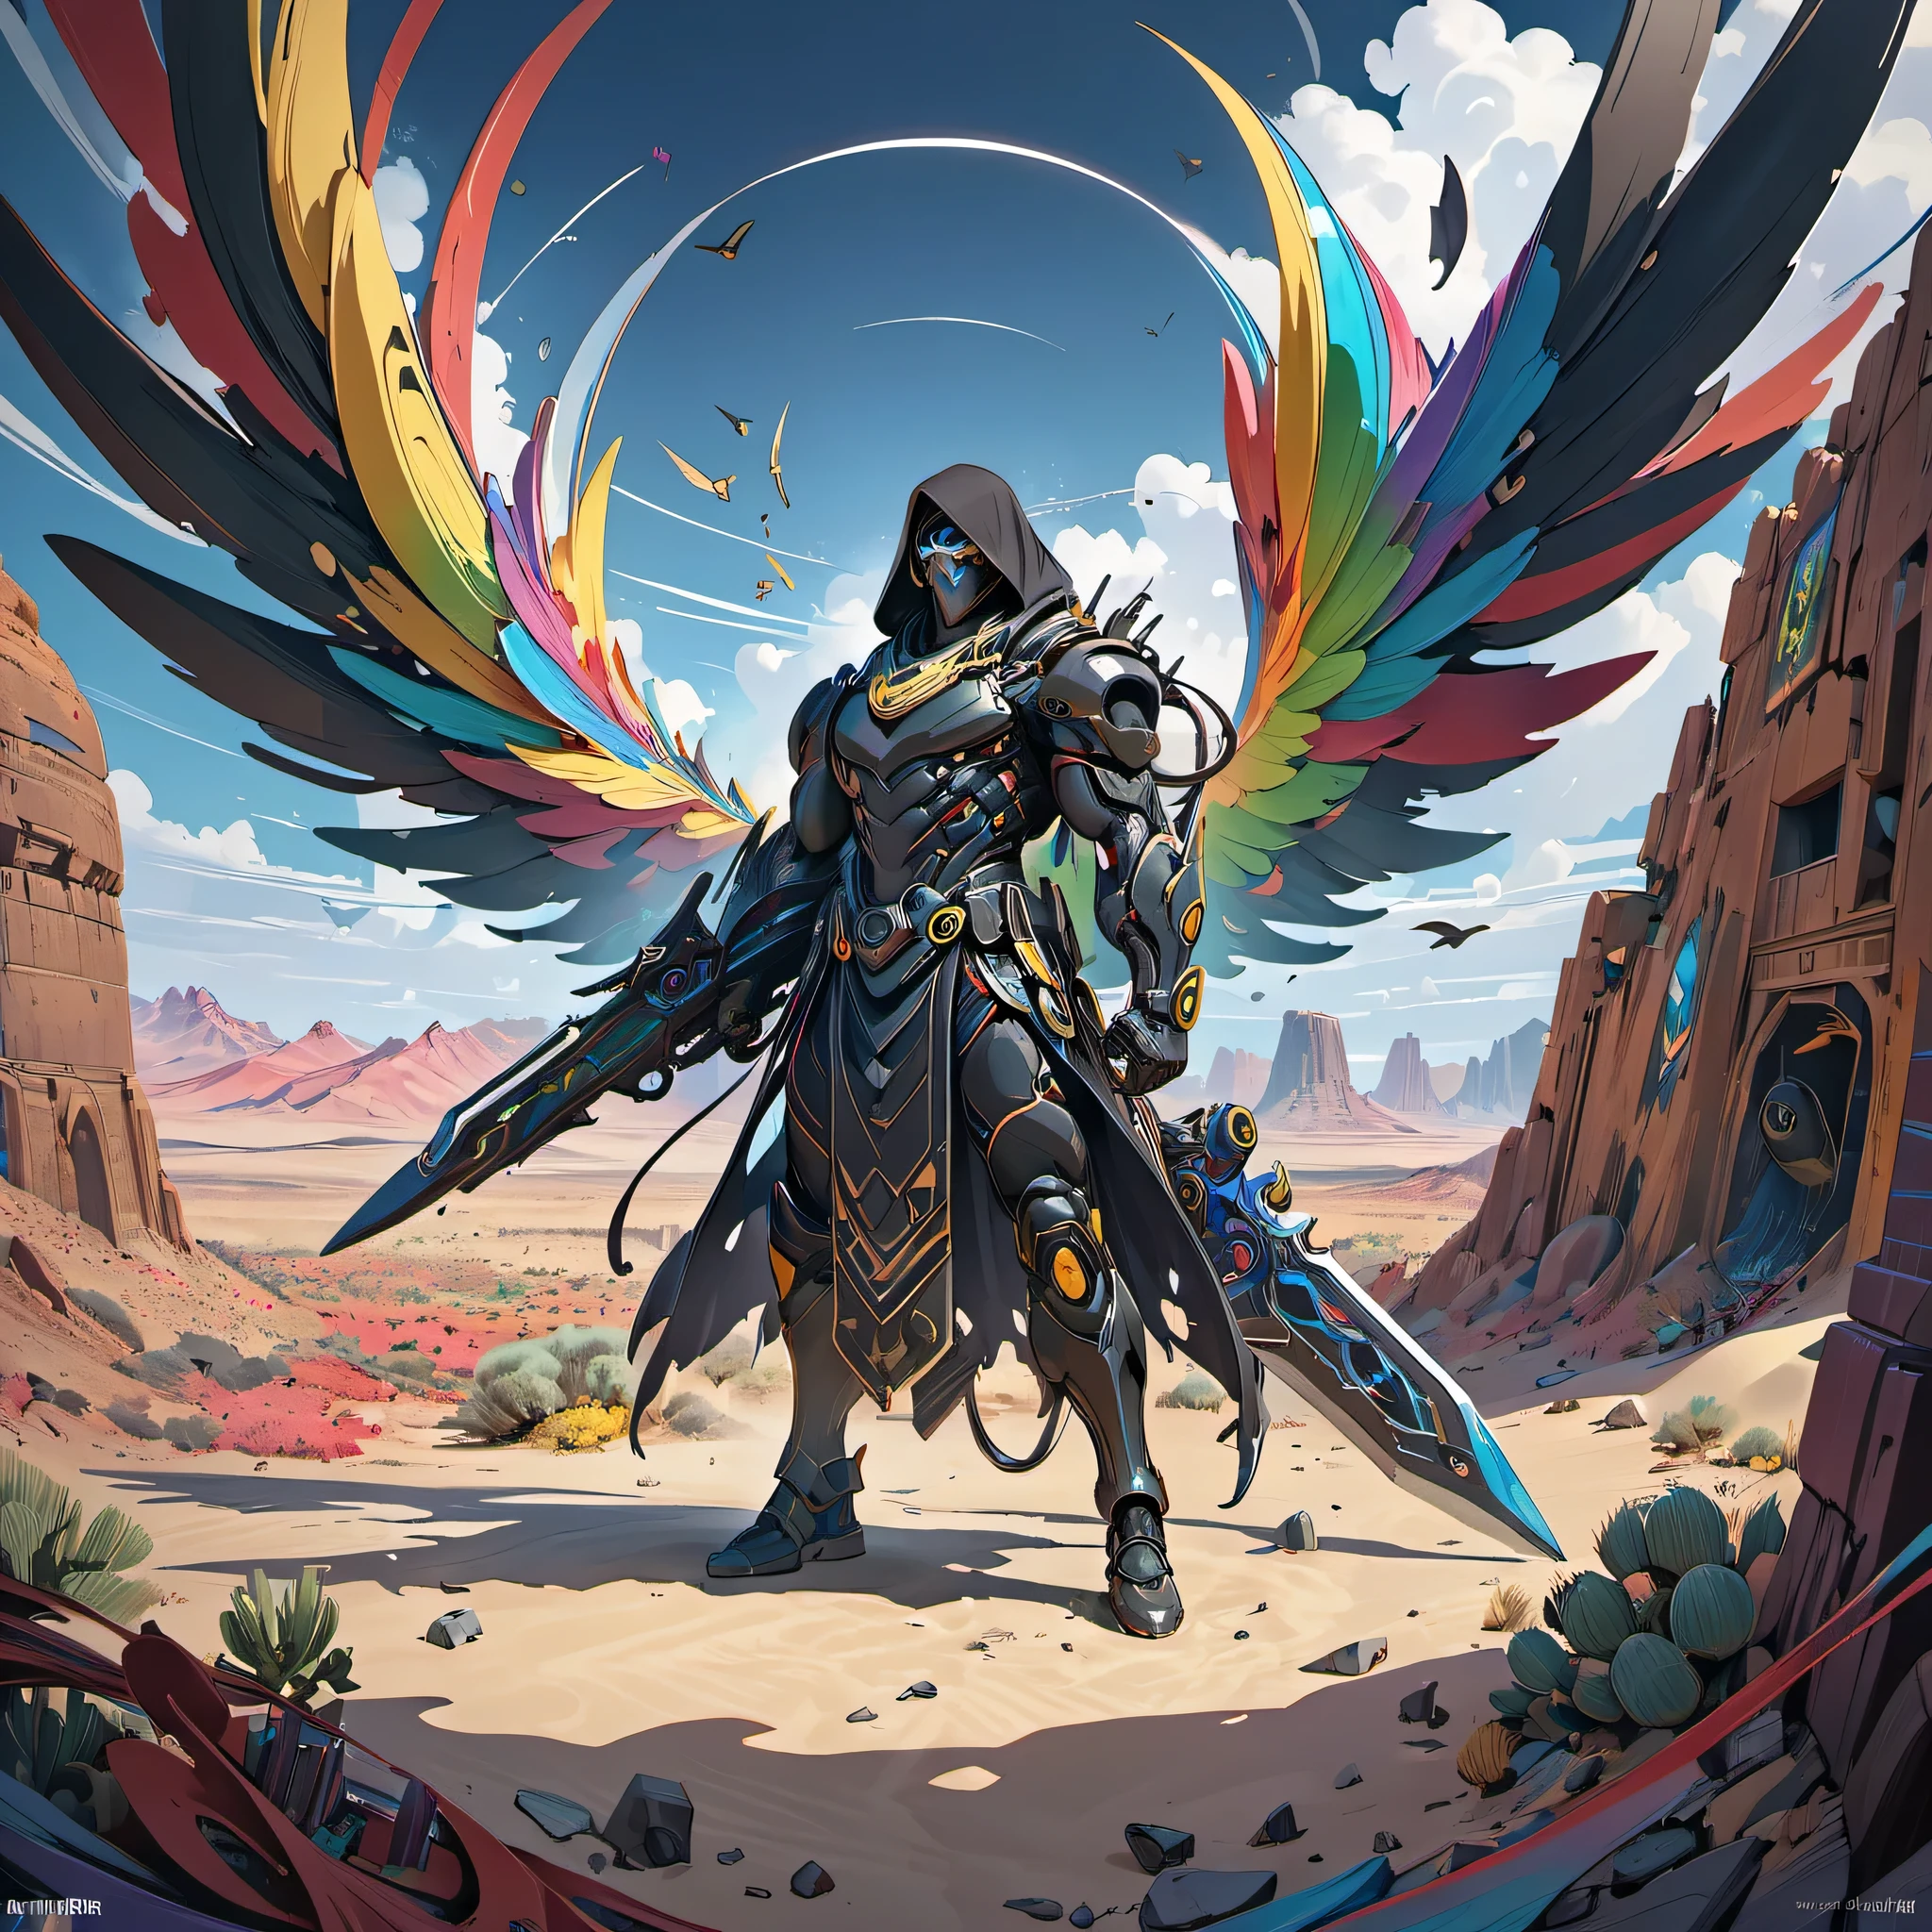 Thief、turbaned、graphic art、desert、whole body, perfection、, 8K, born, highest quality, pieces fly, ultra high resolution, very detailedな目と顔, ((pieces fly, Exclusive)), detailed background, holding weapon,born object luminescence、monolith、masterpiece、spectrum、very detailedがたくさん 、vivid details、race、surreal、anatomical、Beautiful background of facial muscles、octane rendering、8K、highest quality、masterpiece、An illustration、very delicate and beautiful、very detailed、ticker ,unity ,wall-,wonderful, attention to detail, masterpiece,highest quality,official art,Hvery detailed ticker unity 8K wallpapers、surrealism、drop、shadow、Constructivism、stereogram、dropshadow、motion blur、8K、Super detailed、highest quality、16K、high detail、Super detailed